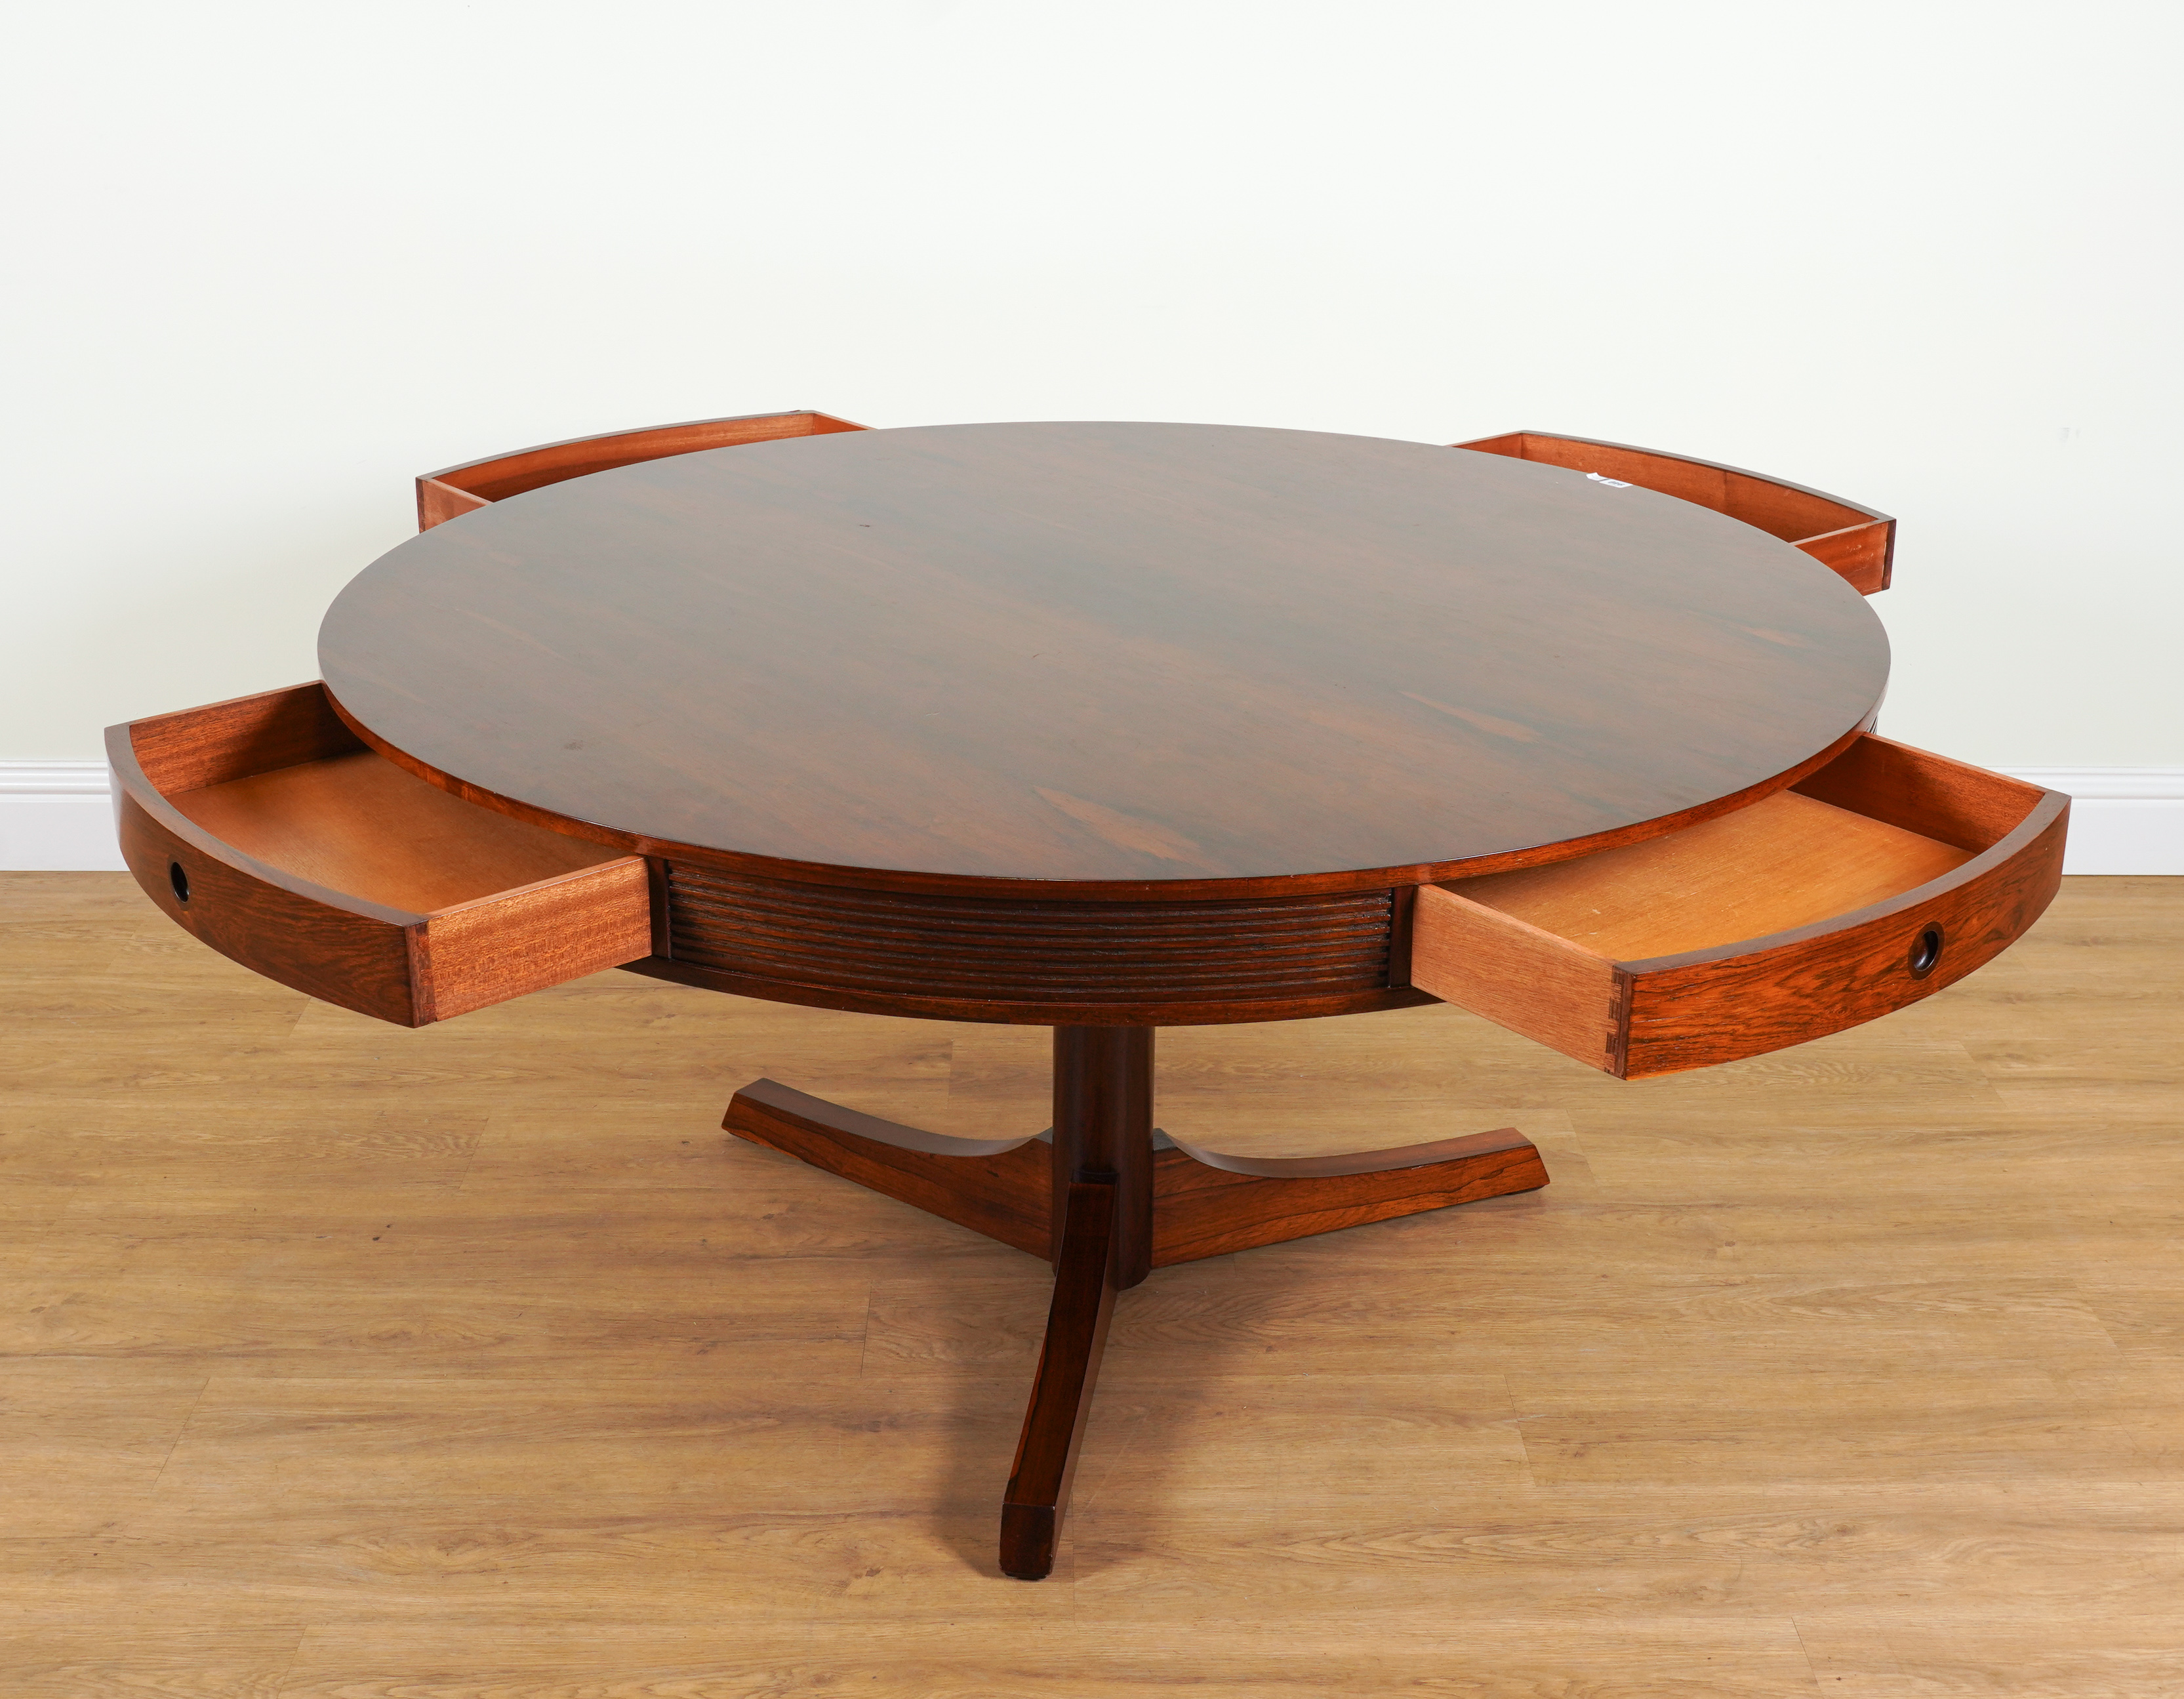 ARCHIE SHINE FOR HEALS FURNITURE; A MID 20TH CENTURY ROSEWOOD CIRCULAR DINING TABLE - Image 6 of 7